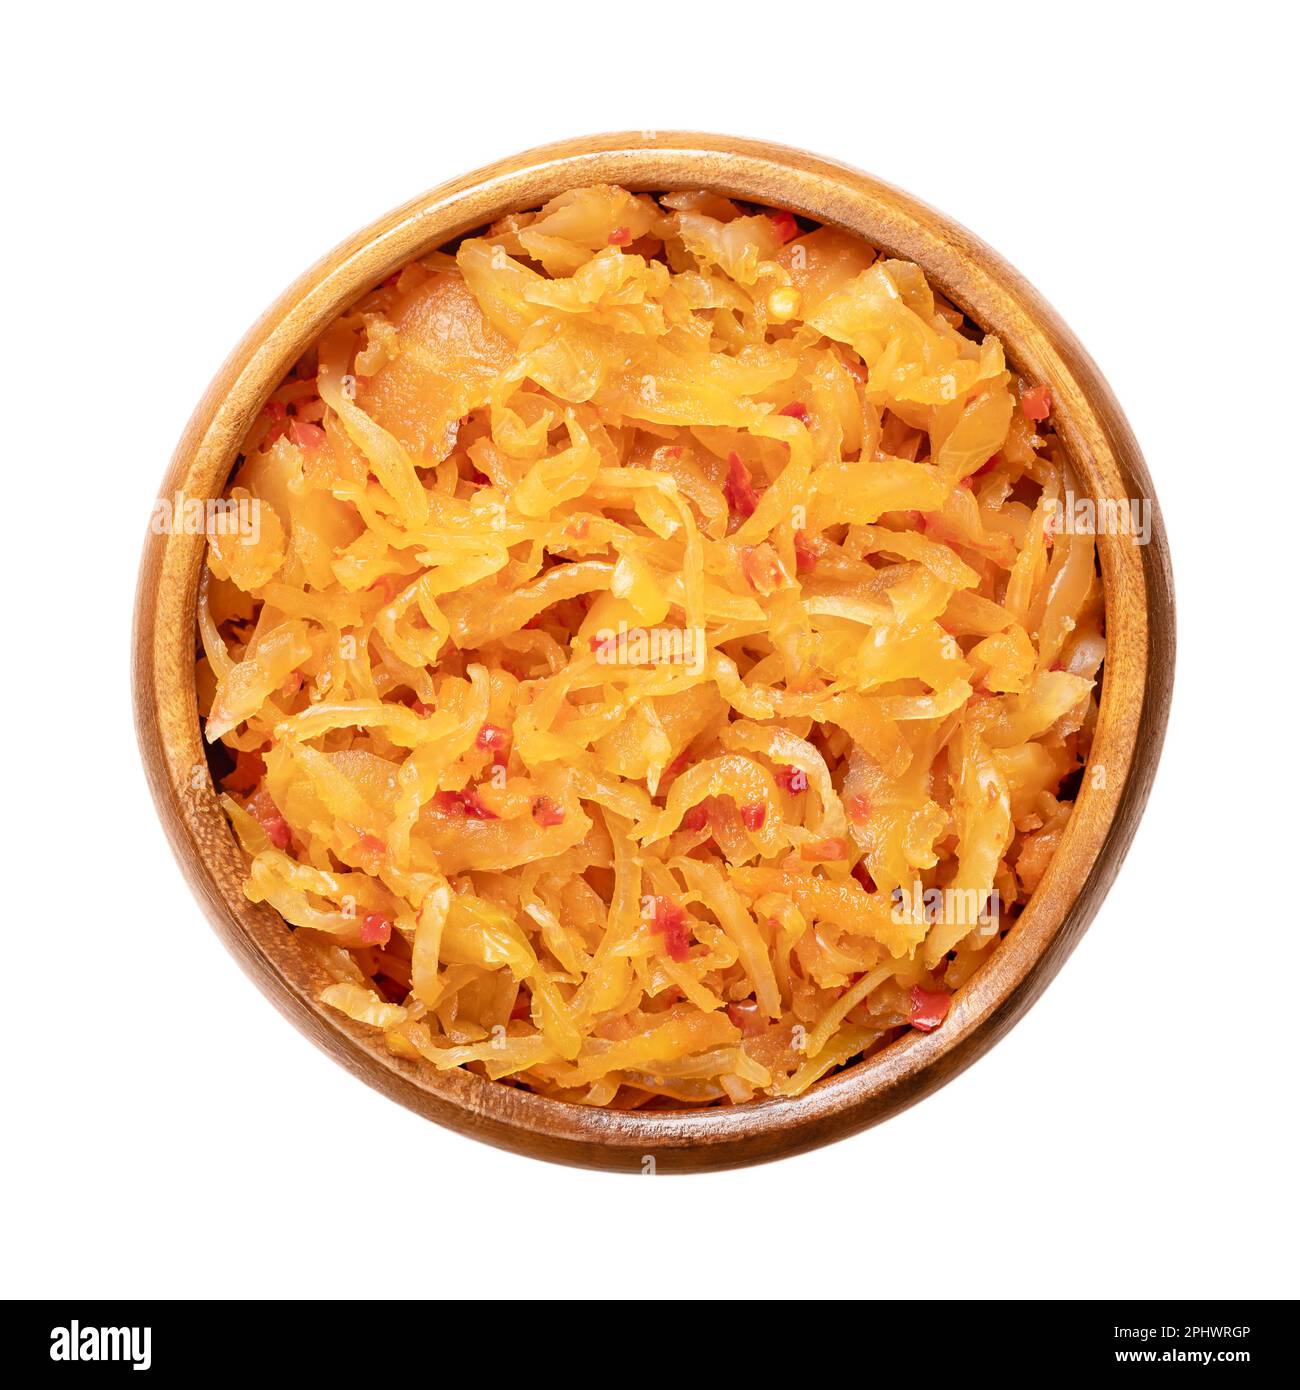 Kimchi, in a wooden bowl. Traditional Korean side dish of salted and fermented vegetables cabbage, carrots, radish and onions, and seasoned. Stock Photo